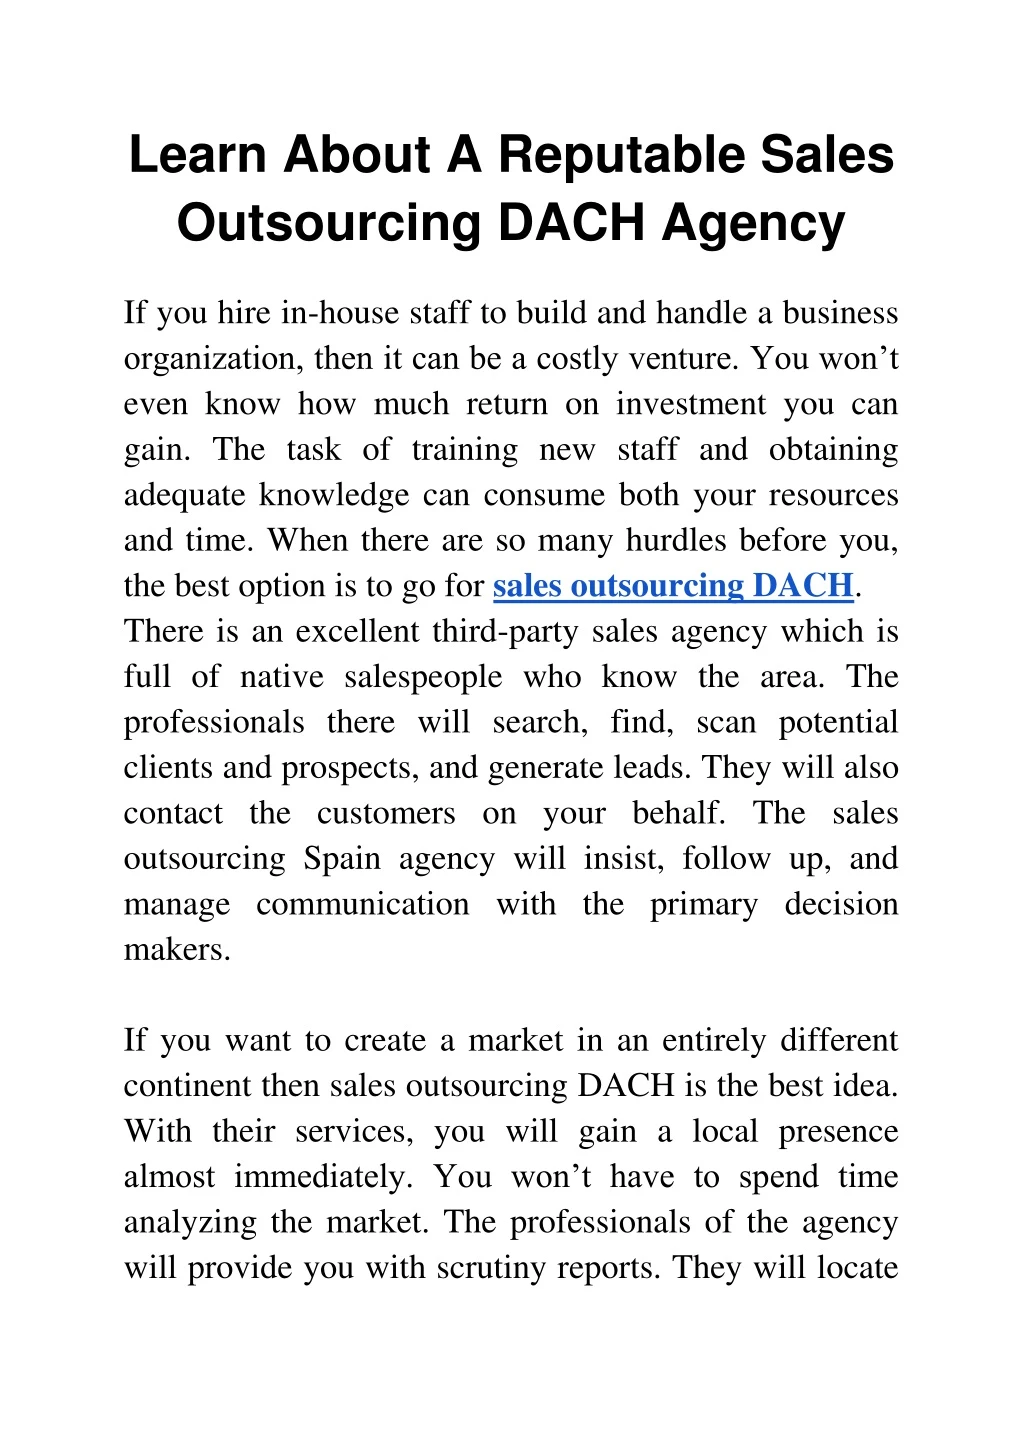 learn about a reputable sales outsourcing dach